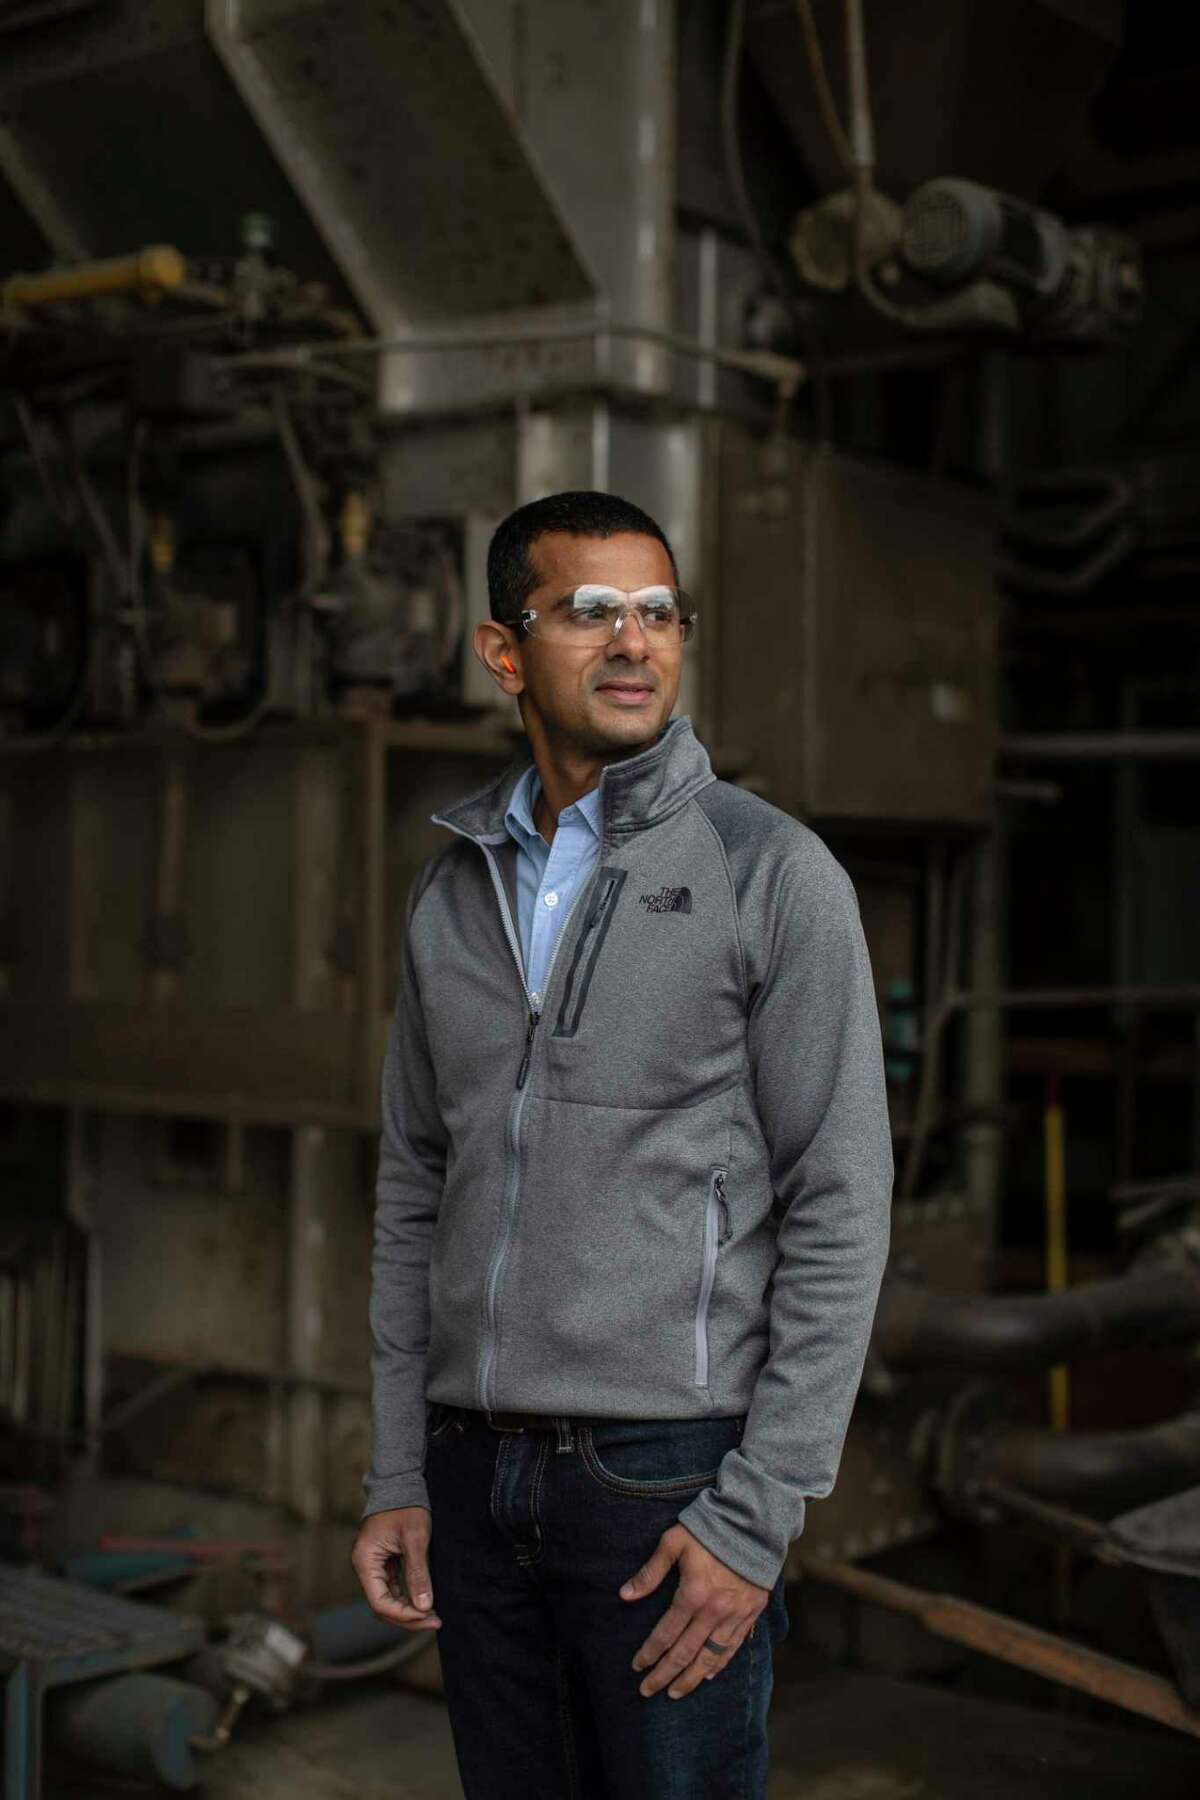 "Things are not good. We didn't anticipate this level of deterioration," said Sachin Shivaram, CEO of Wisconsin Aluminum Foundry. "Orders are down across the board."